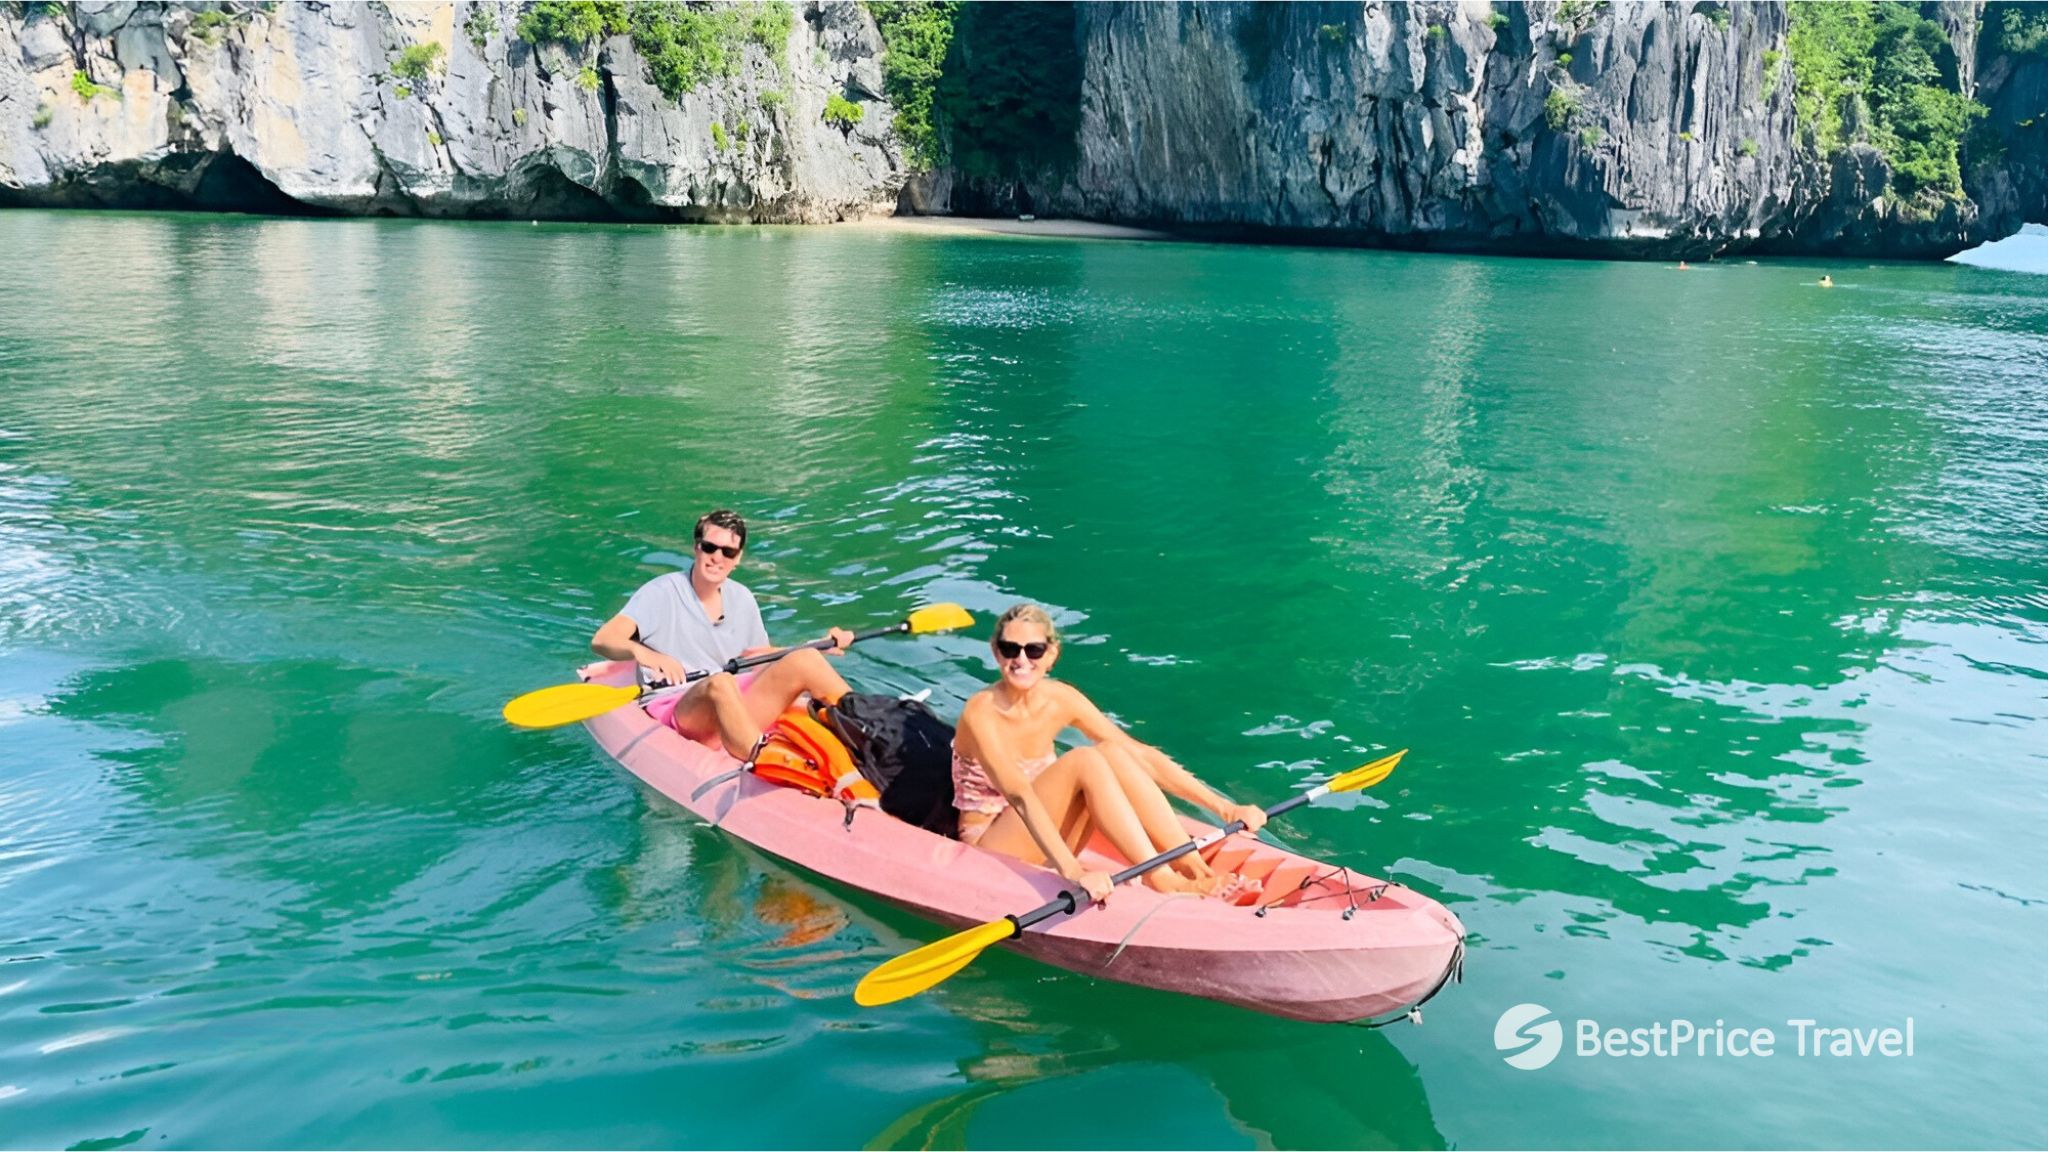 Day 11 Adventurous Tourists Exploring Scenic Waters By Kayaking